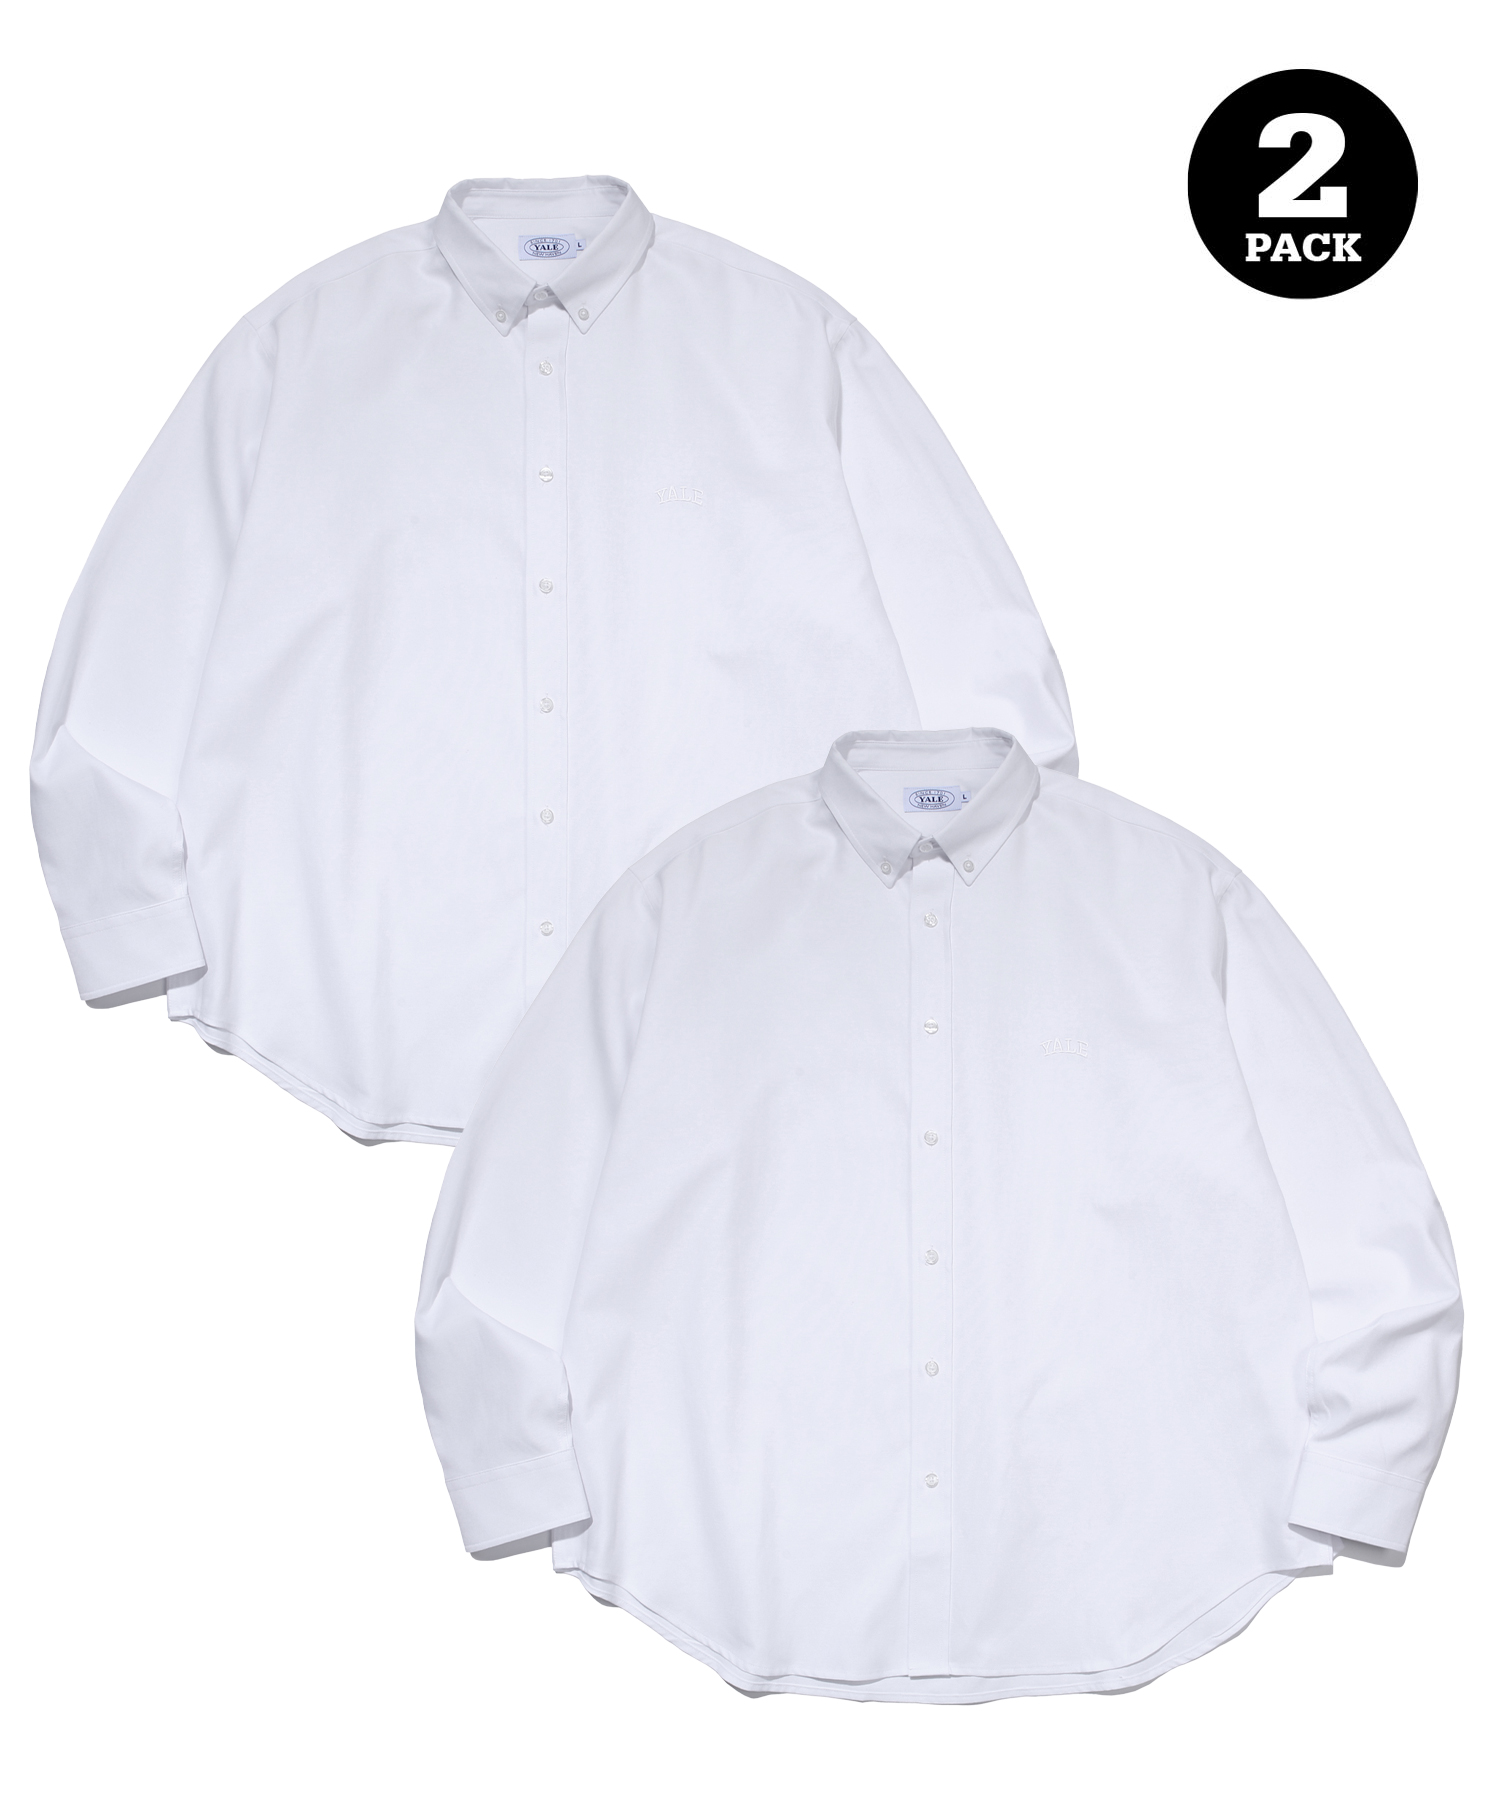 (24SS) [ONEMILE WEAR] 2PACK OXFORD BIG SHIRT WHITE / CANDY STRIPE